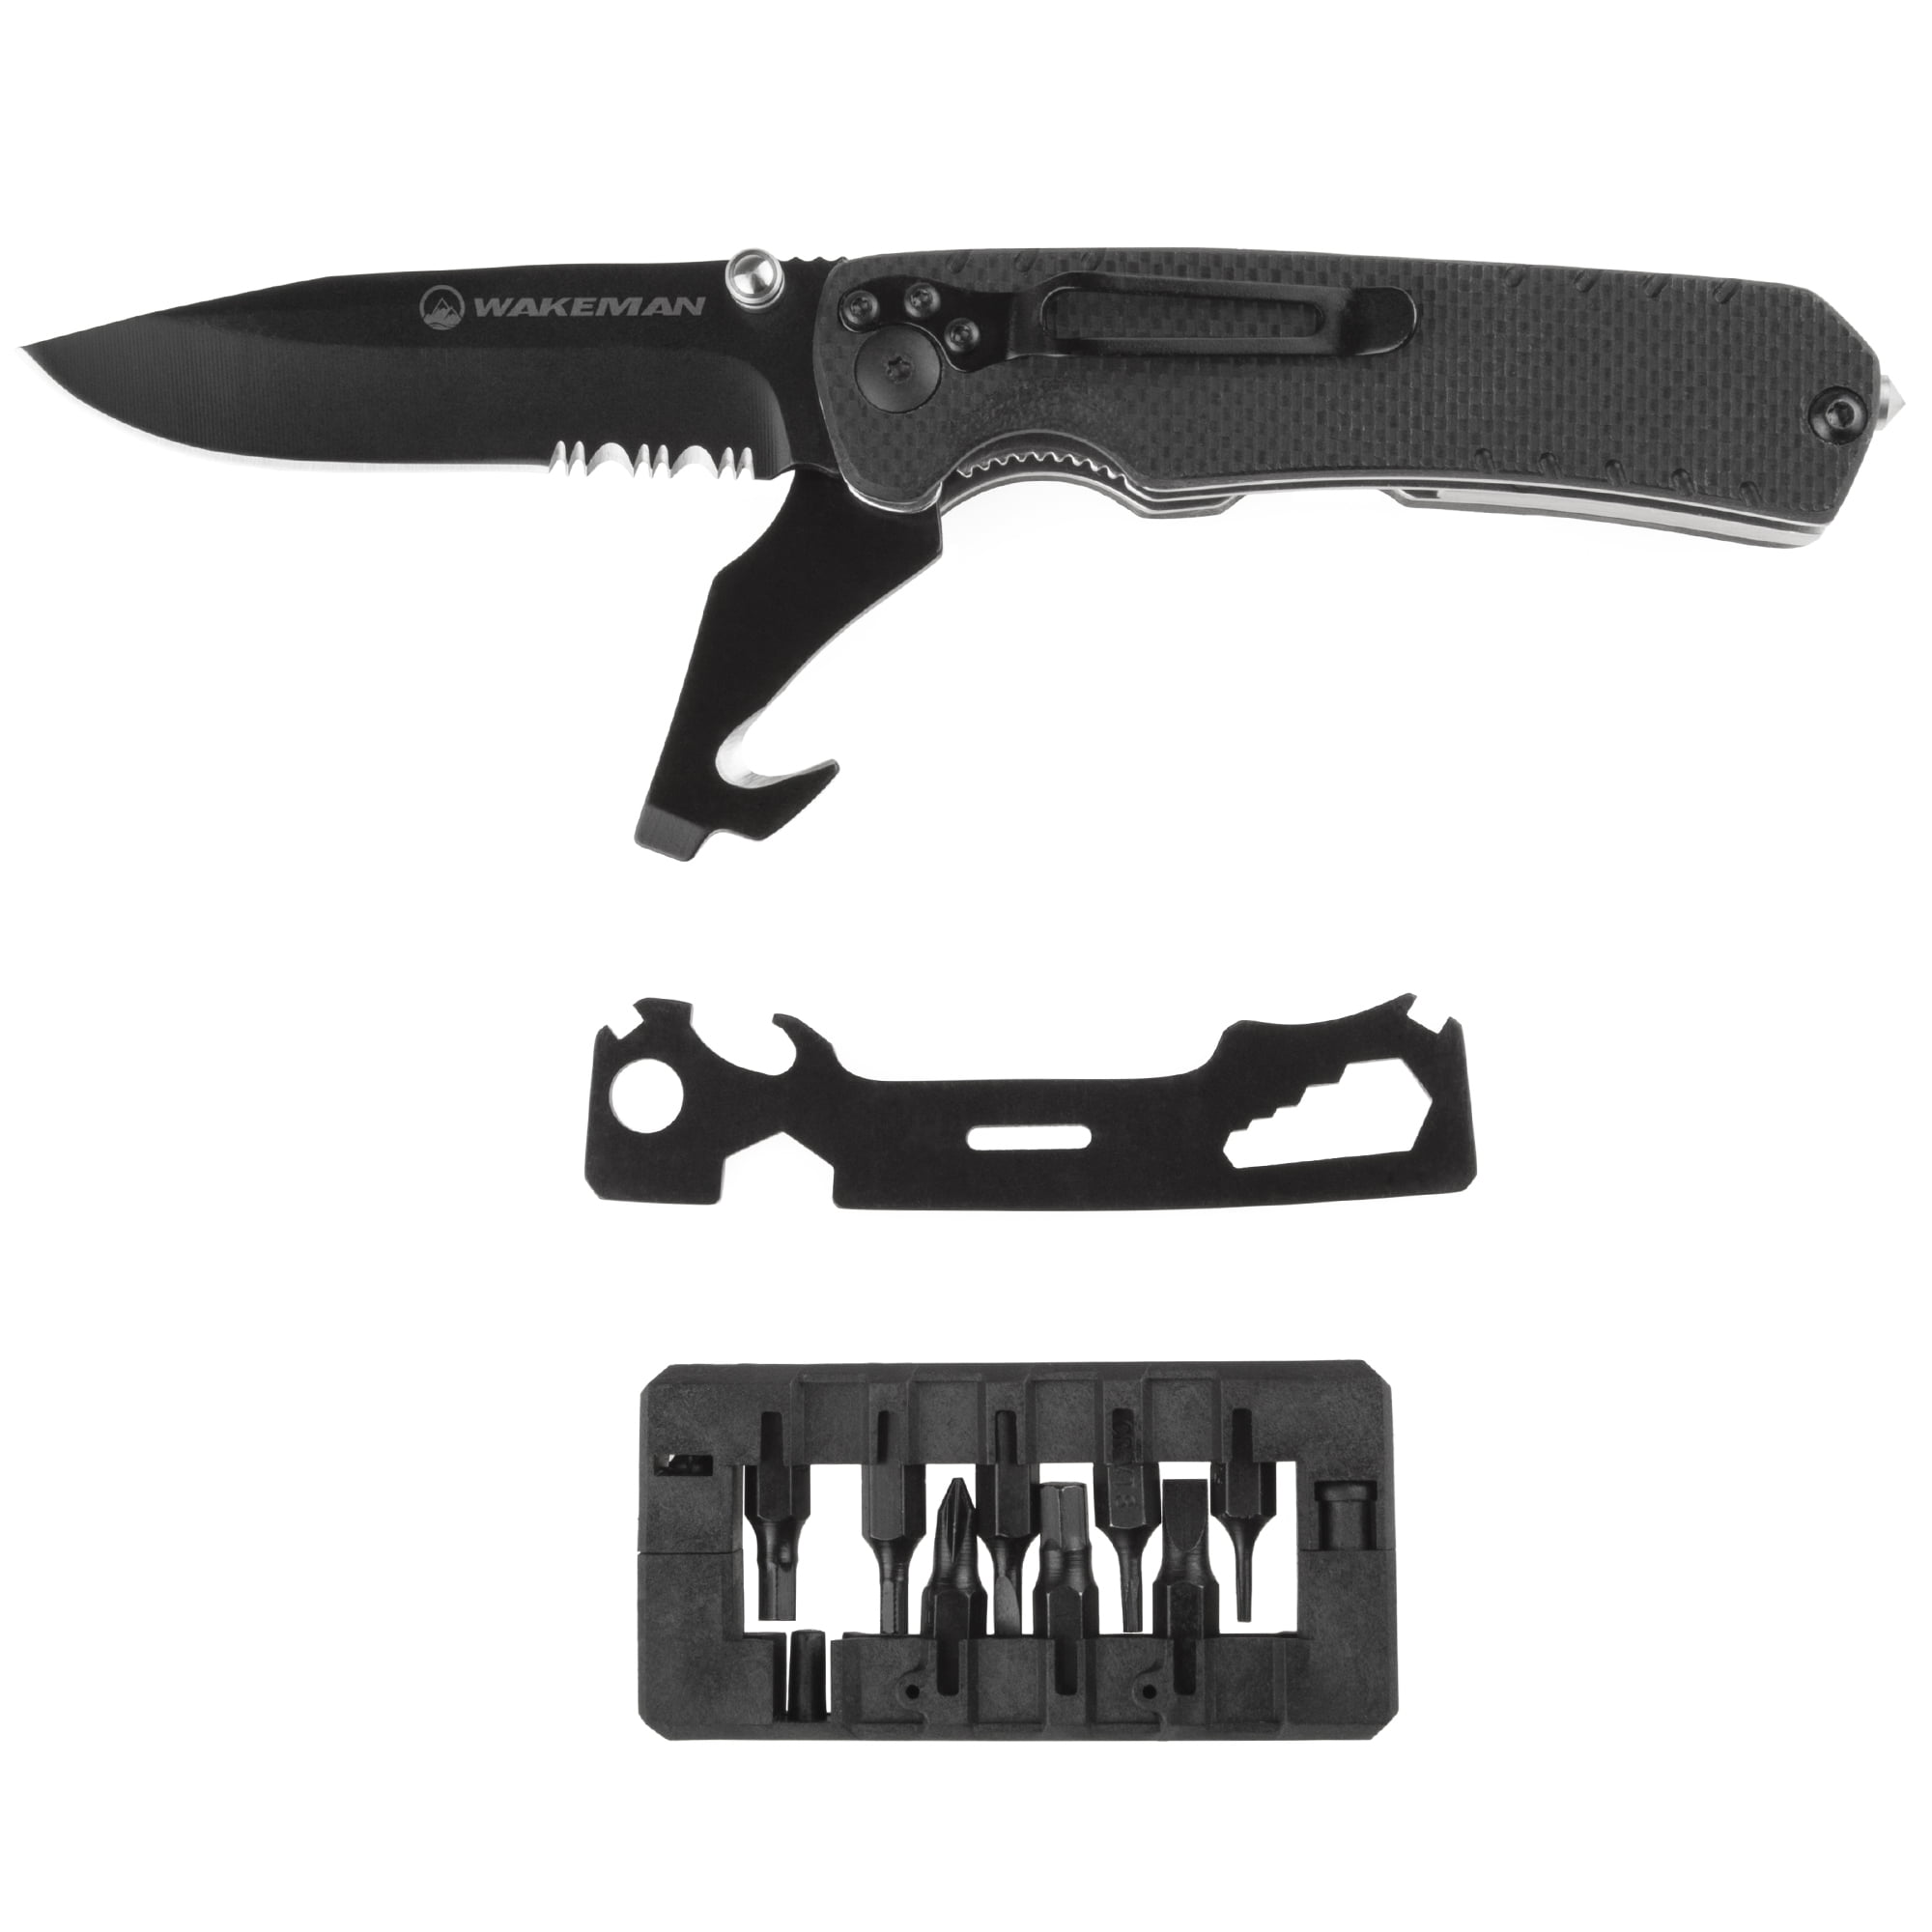 9-in-1 KC Micro Pliers Folding Utility Swiss Army Pocket Knife and Tools -  #79151